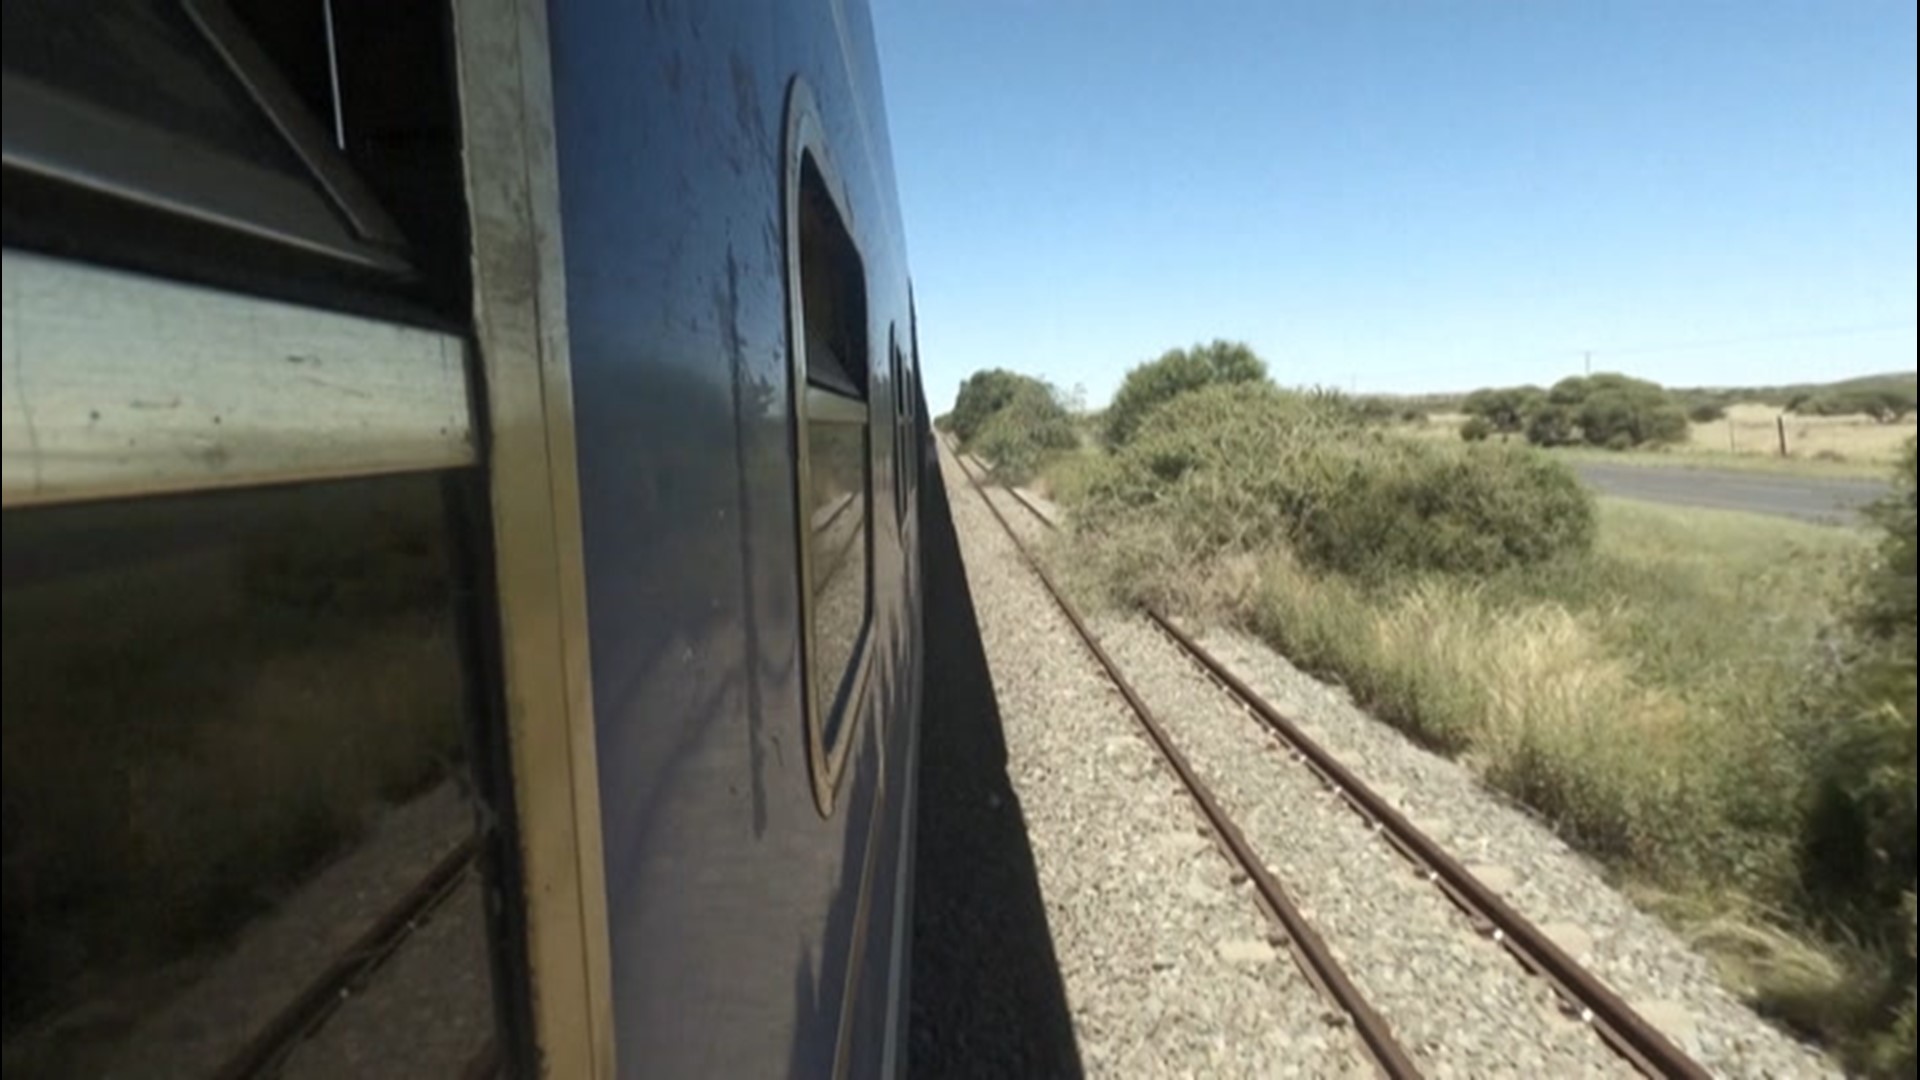 The Blue Train, one of South Africa's premiere tourist attractions, connects coastal Cape Town with capital city Pretoria.  Locals are getting a chance to get on board thanks to the pandemic.